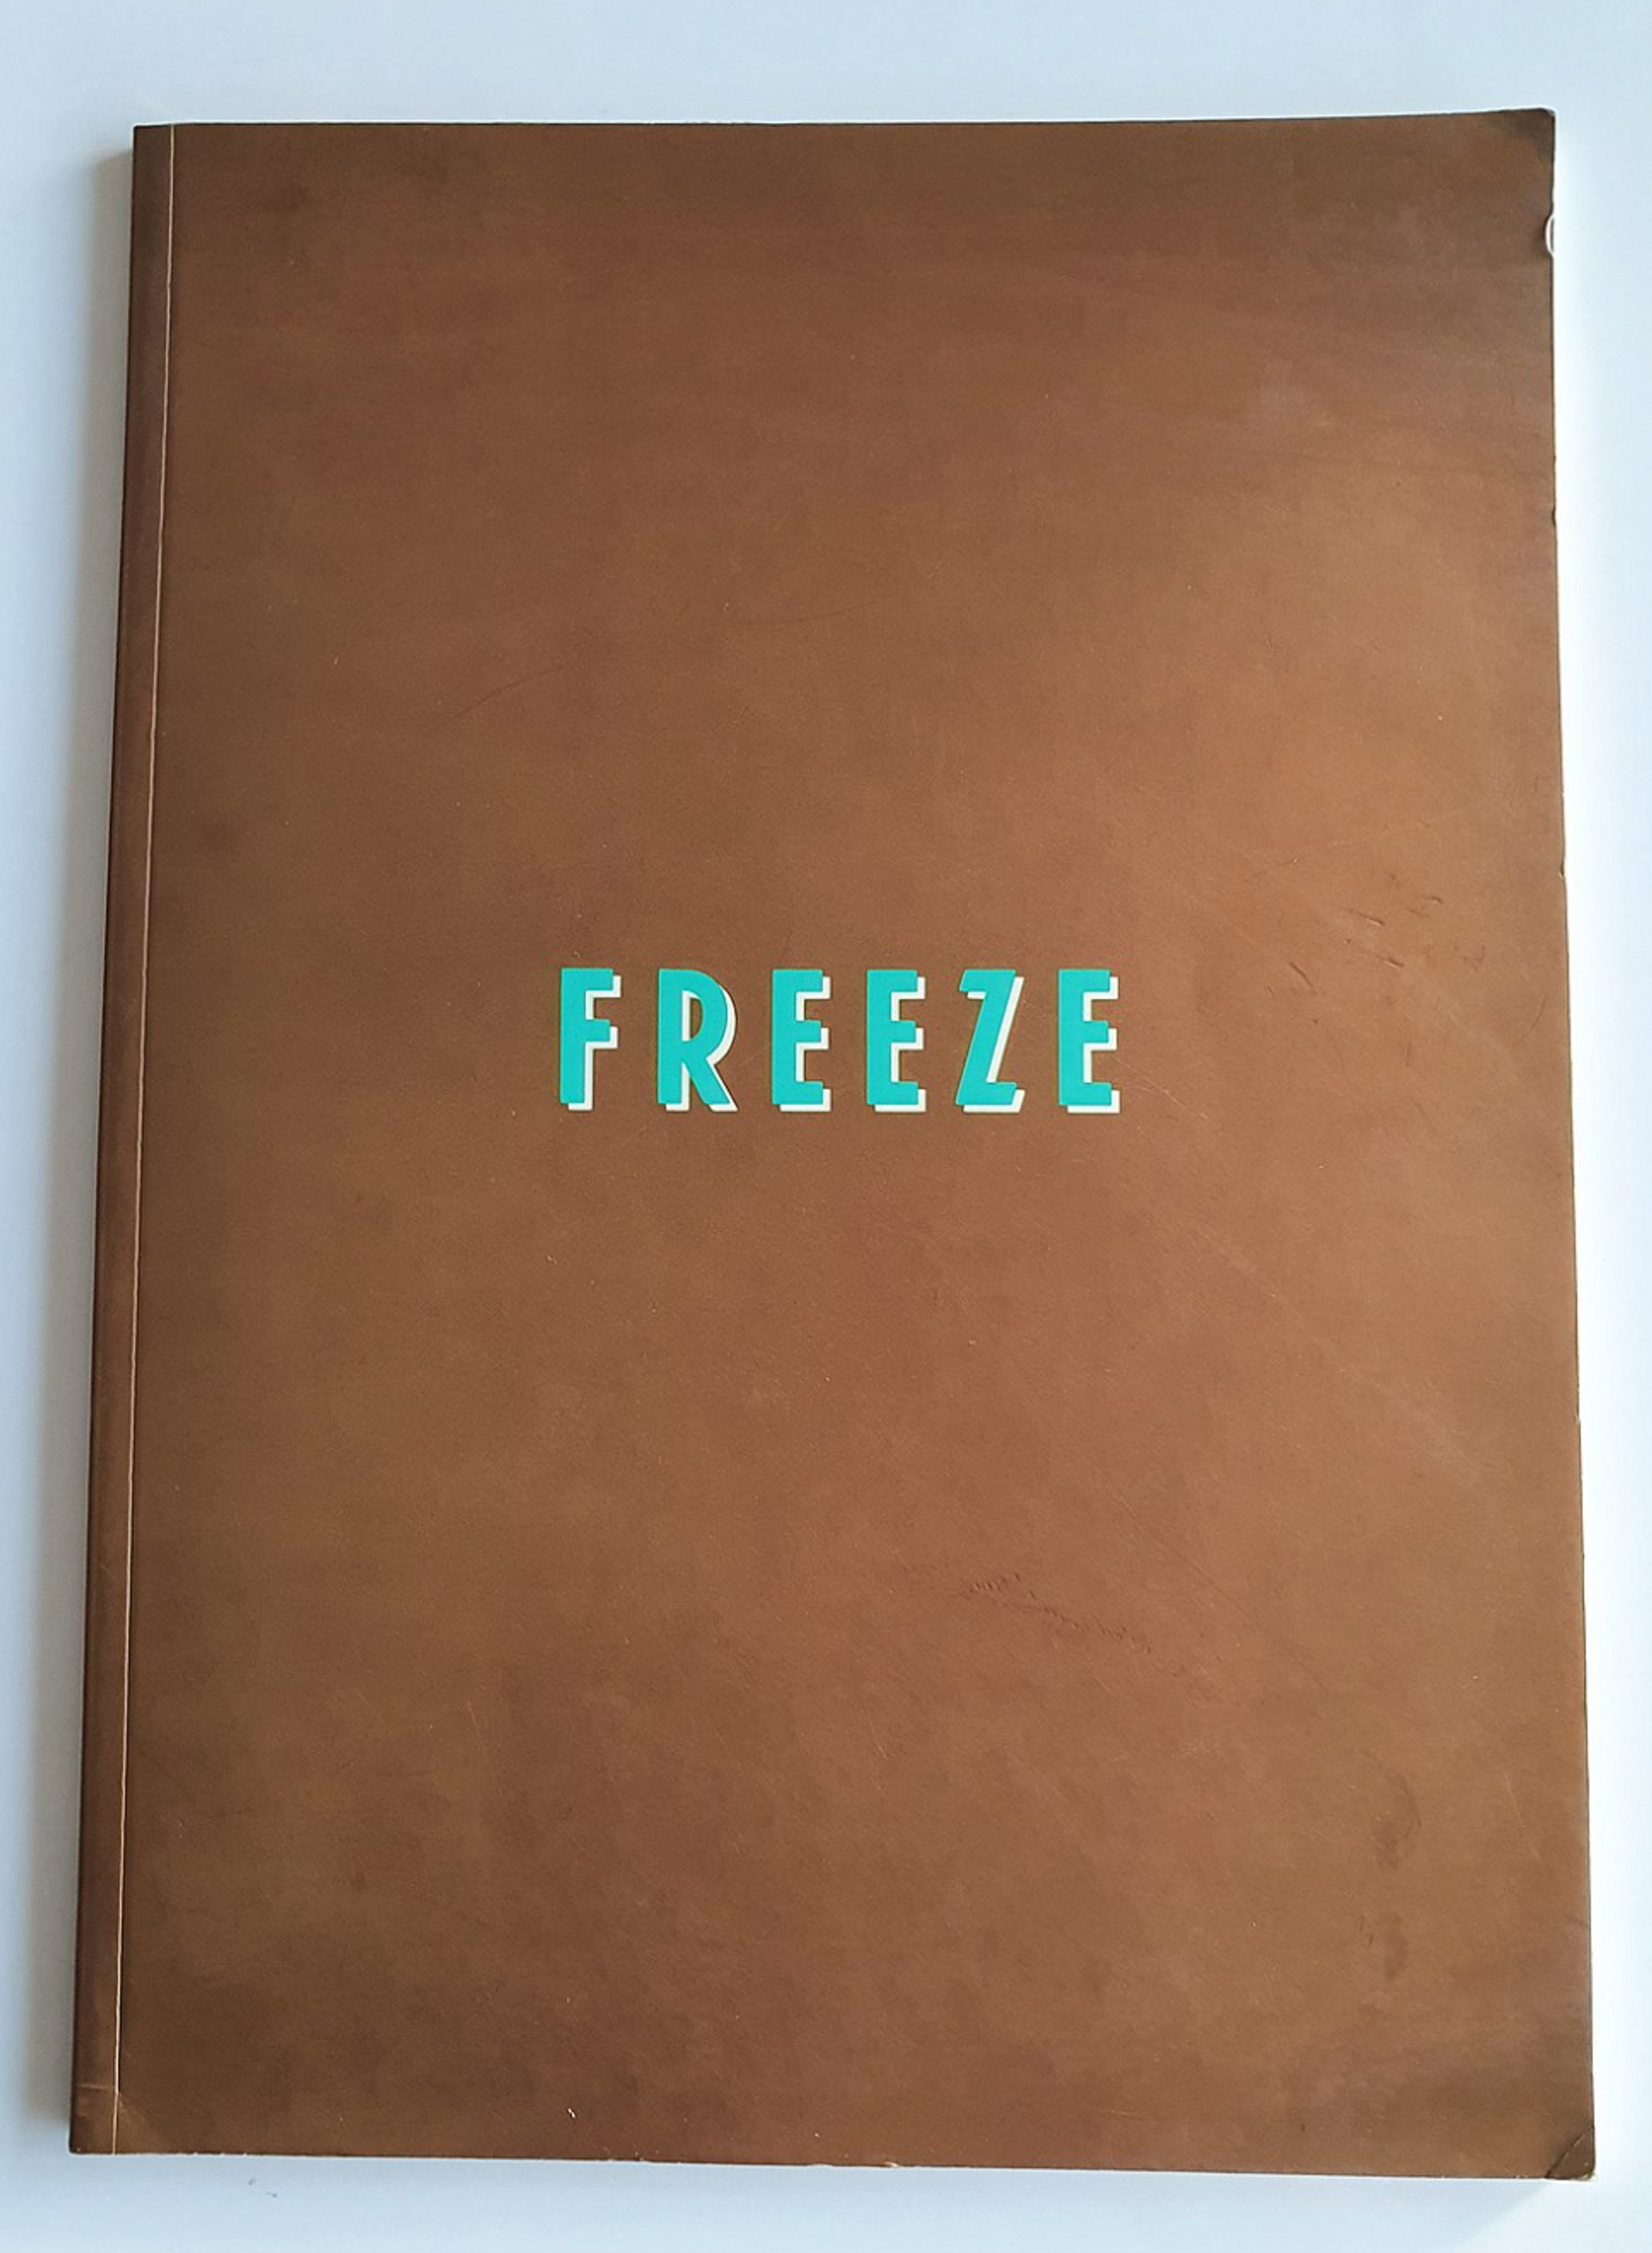 Freeze Exhibition Catalogue by Damien Hirst